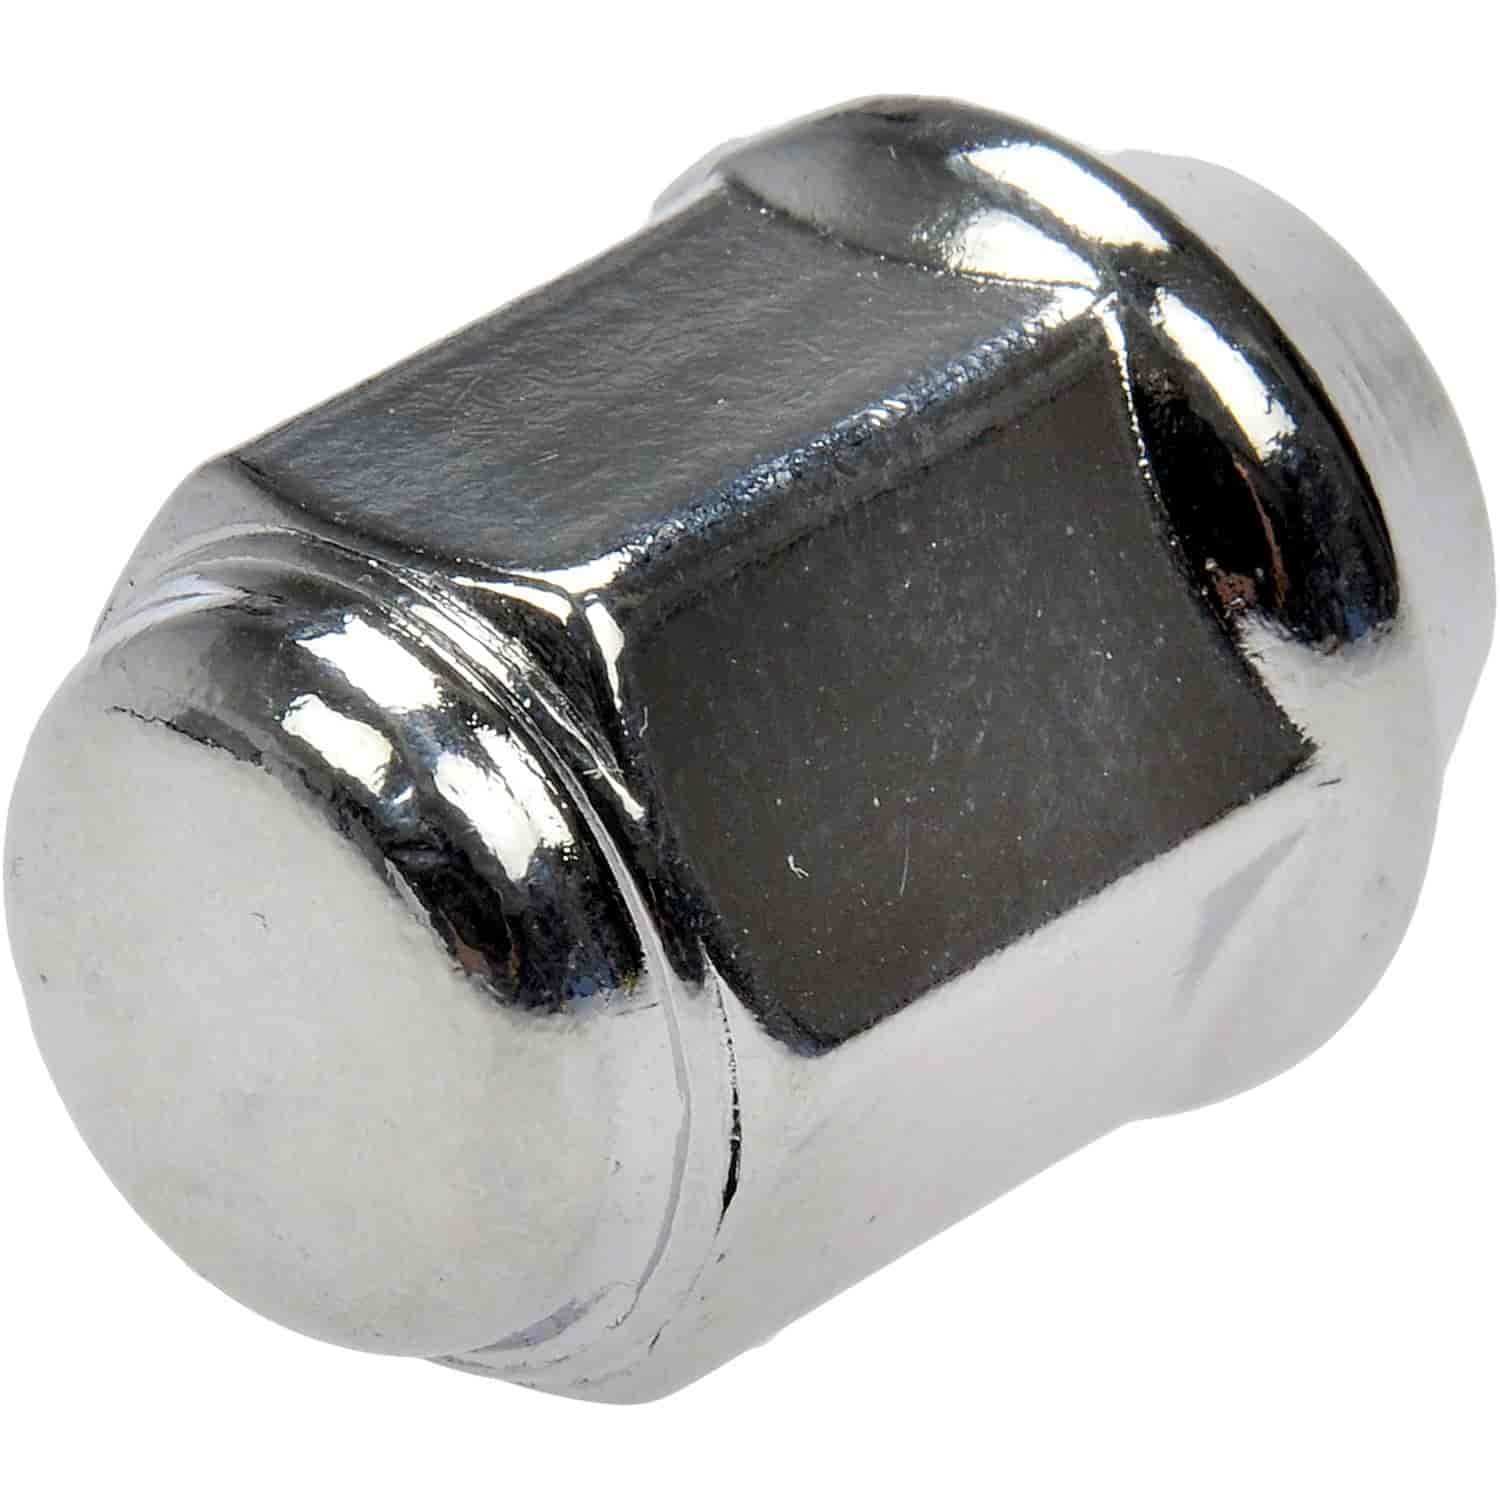 Wheel Nut M12-1.50 Dometop Capped - 19mm Hex 31mm Length